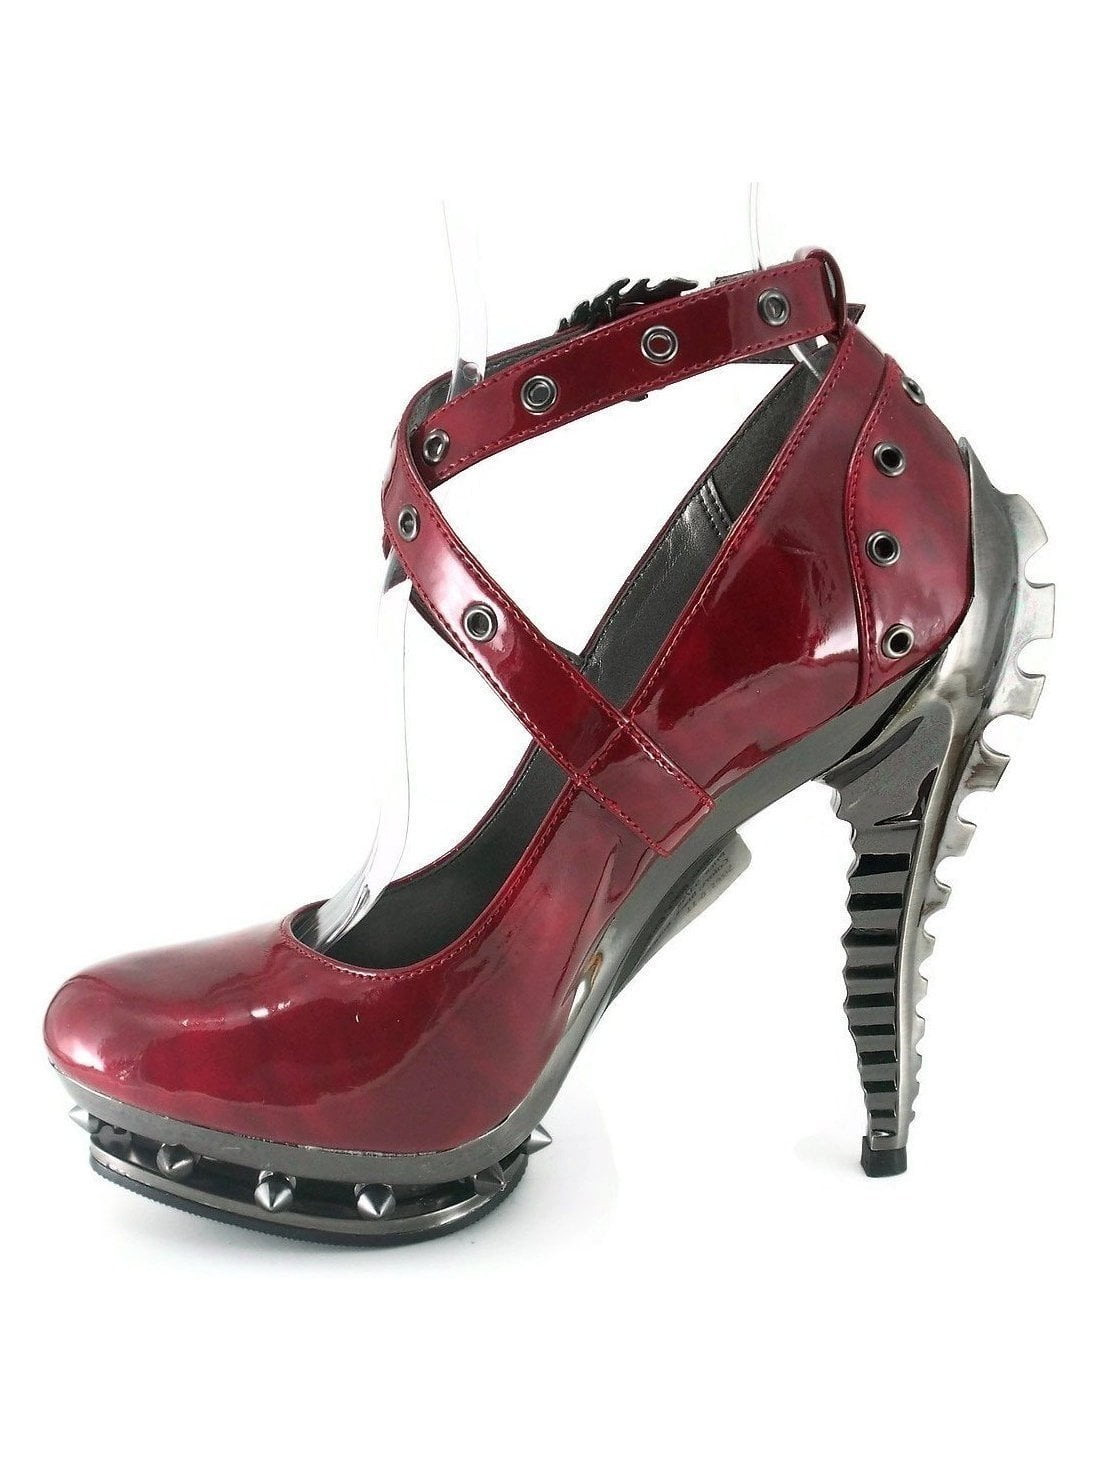 Hades Shoes H-Triton 5 inch shiny Pump with Chrome Rivets buckle and ...